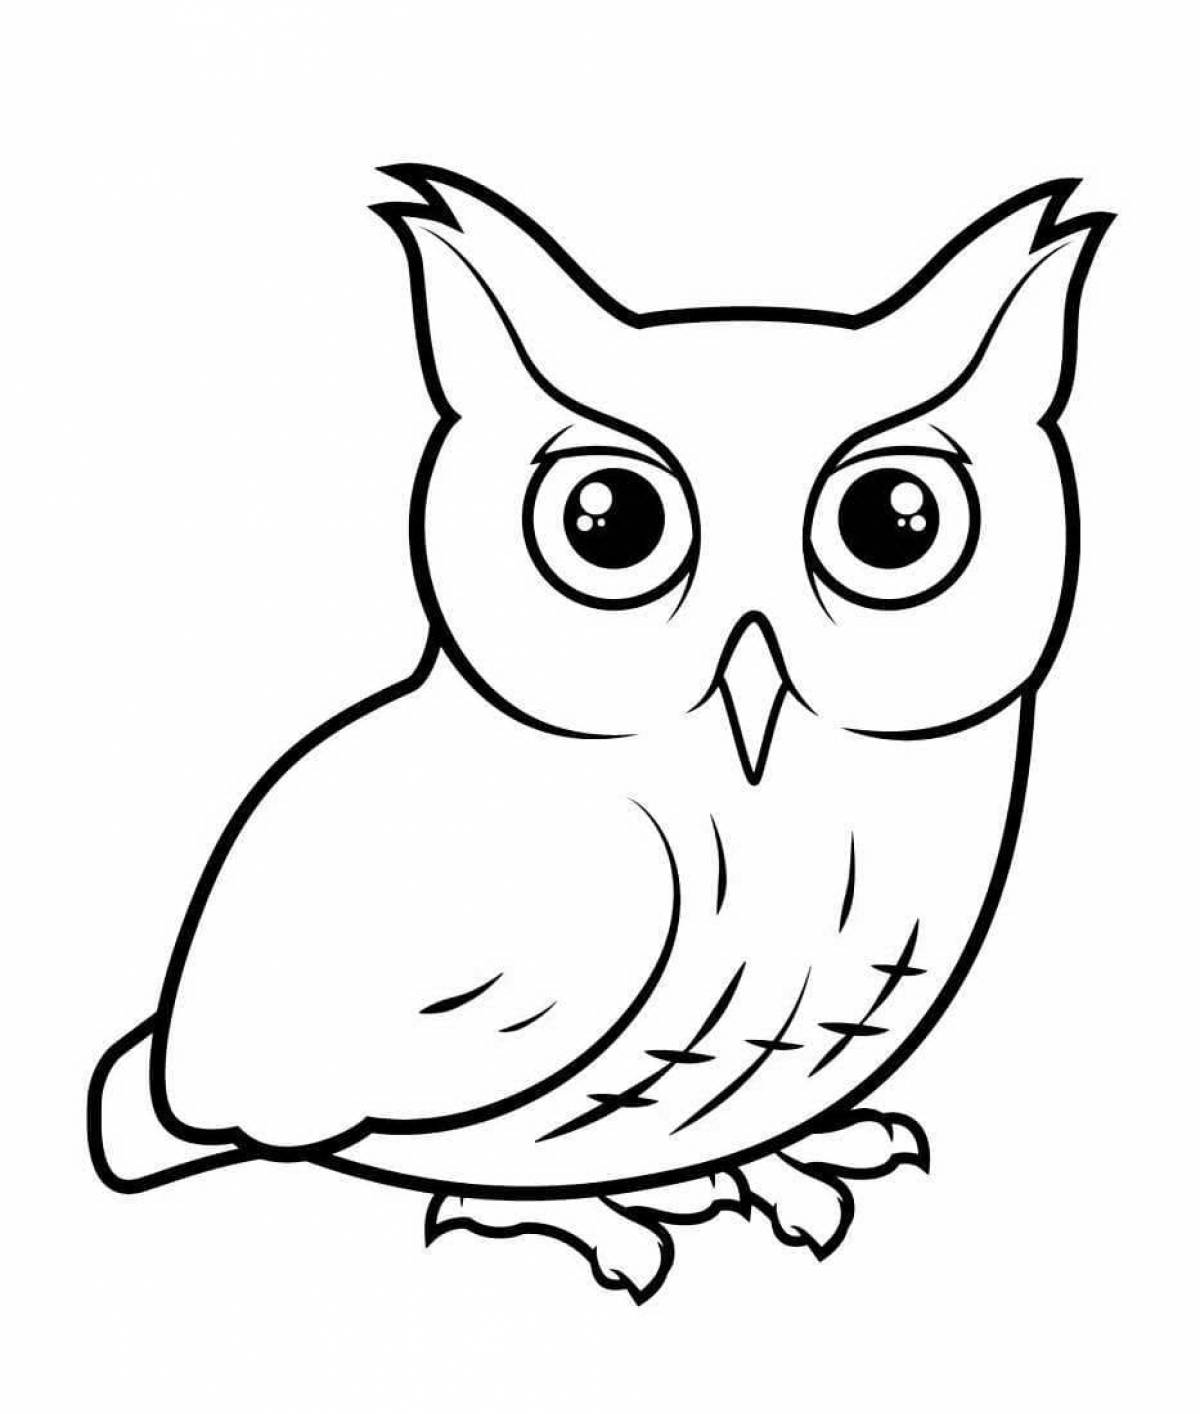 Bright owl coloring book